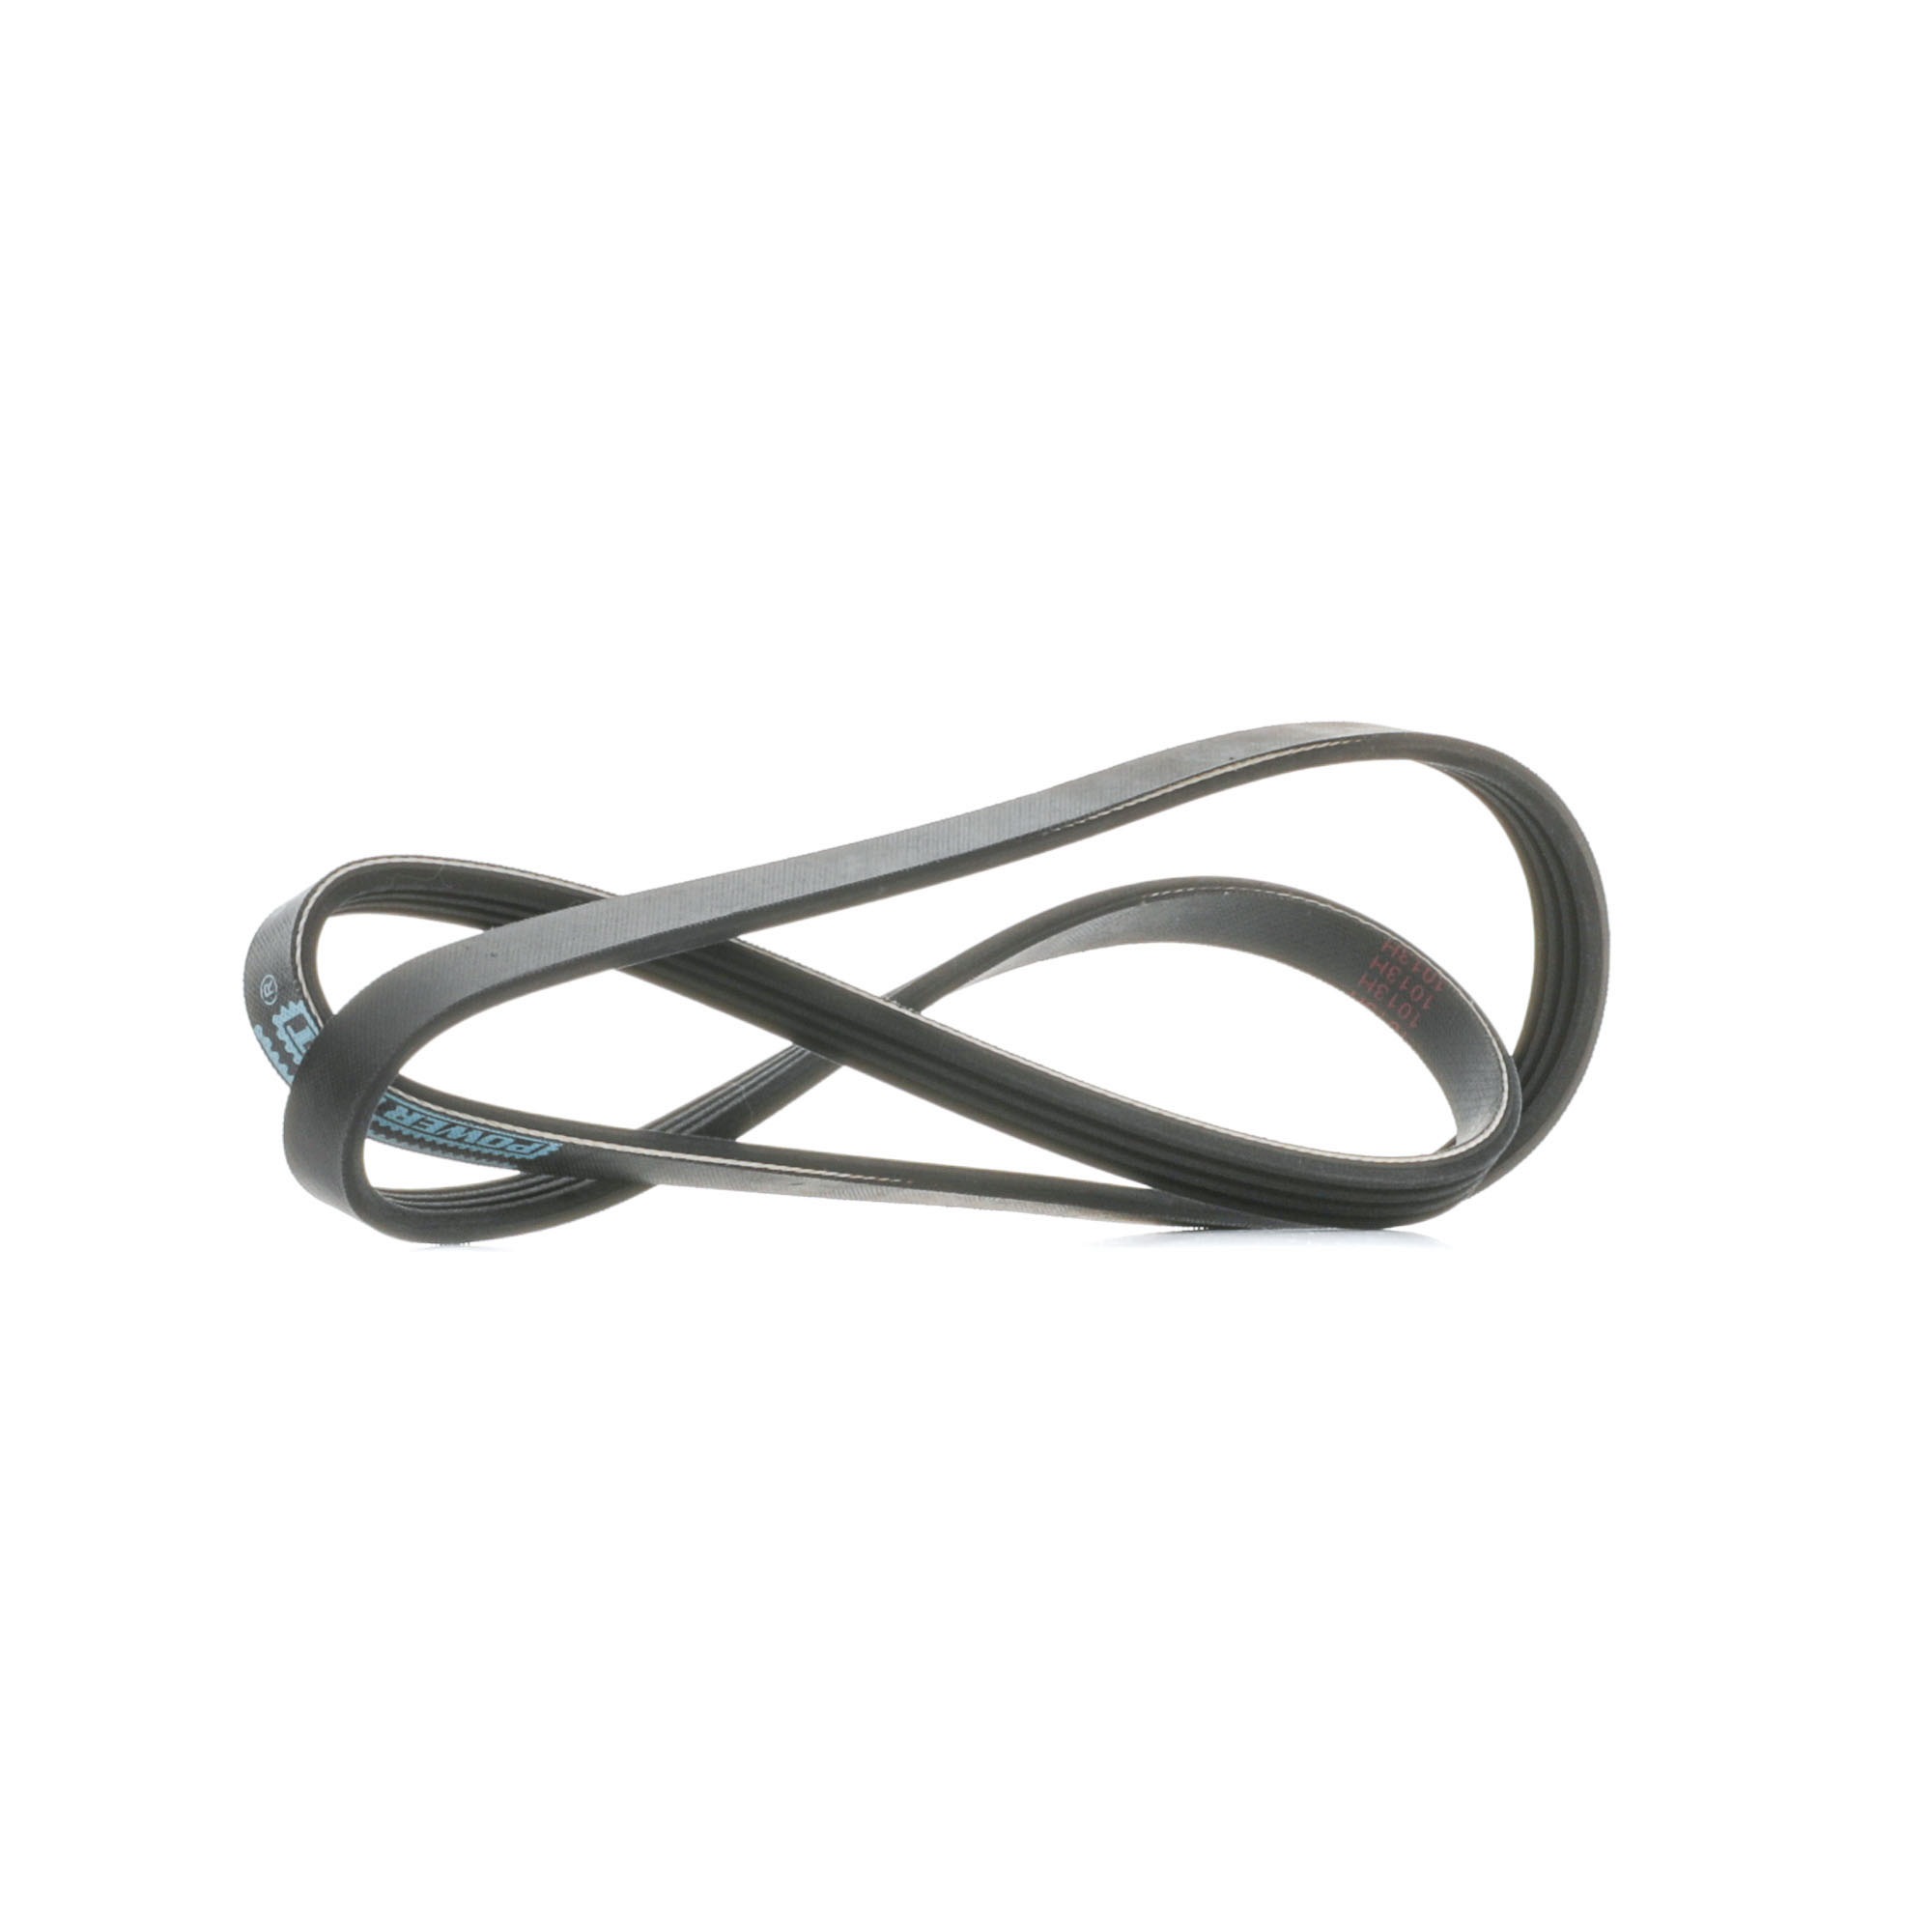 MAPCO 241163 Serpentine belt RENAULT experience and price